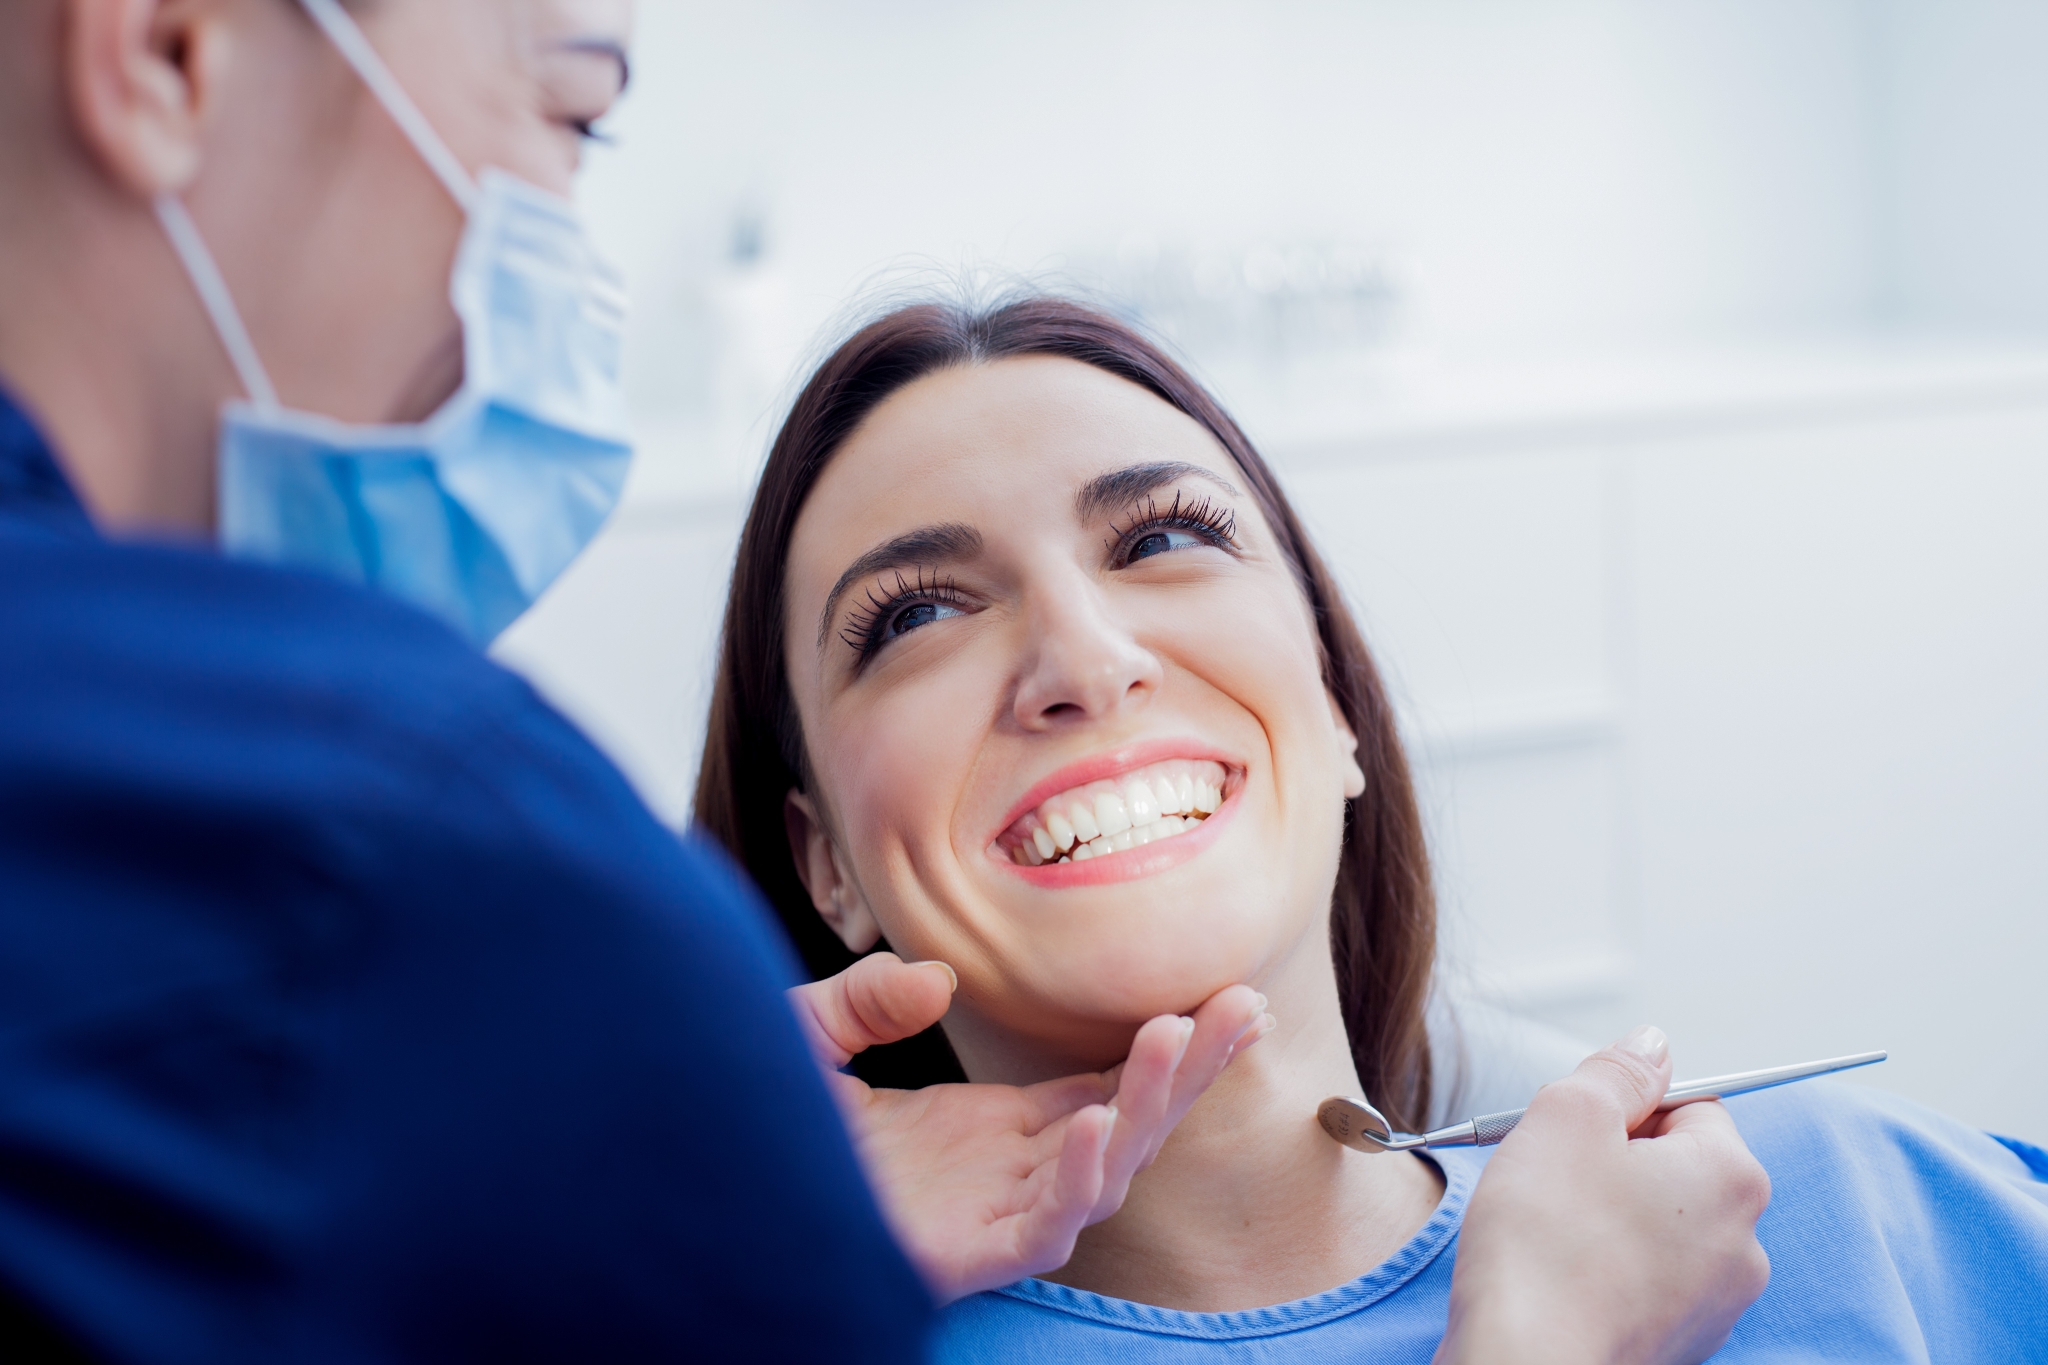 Woman smiling at a dental professional